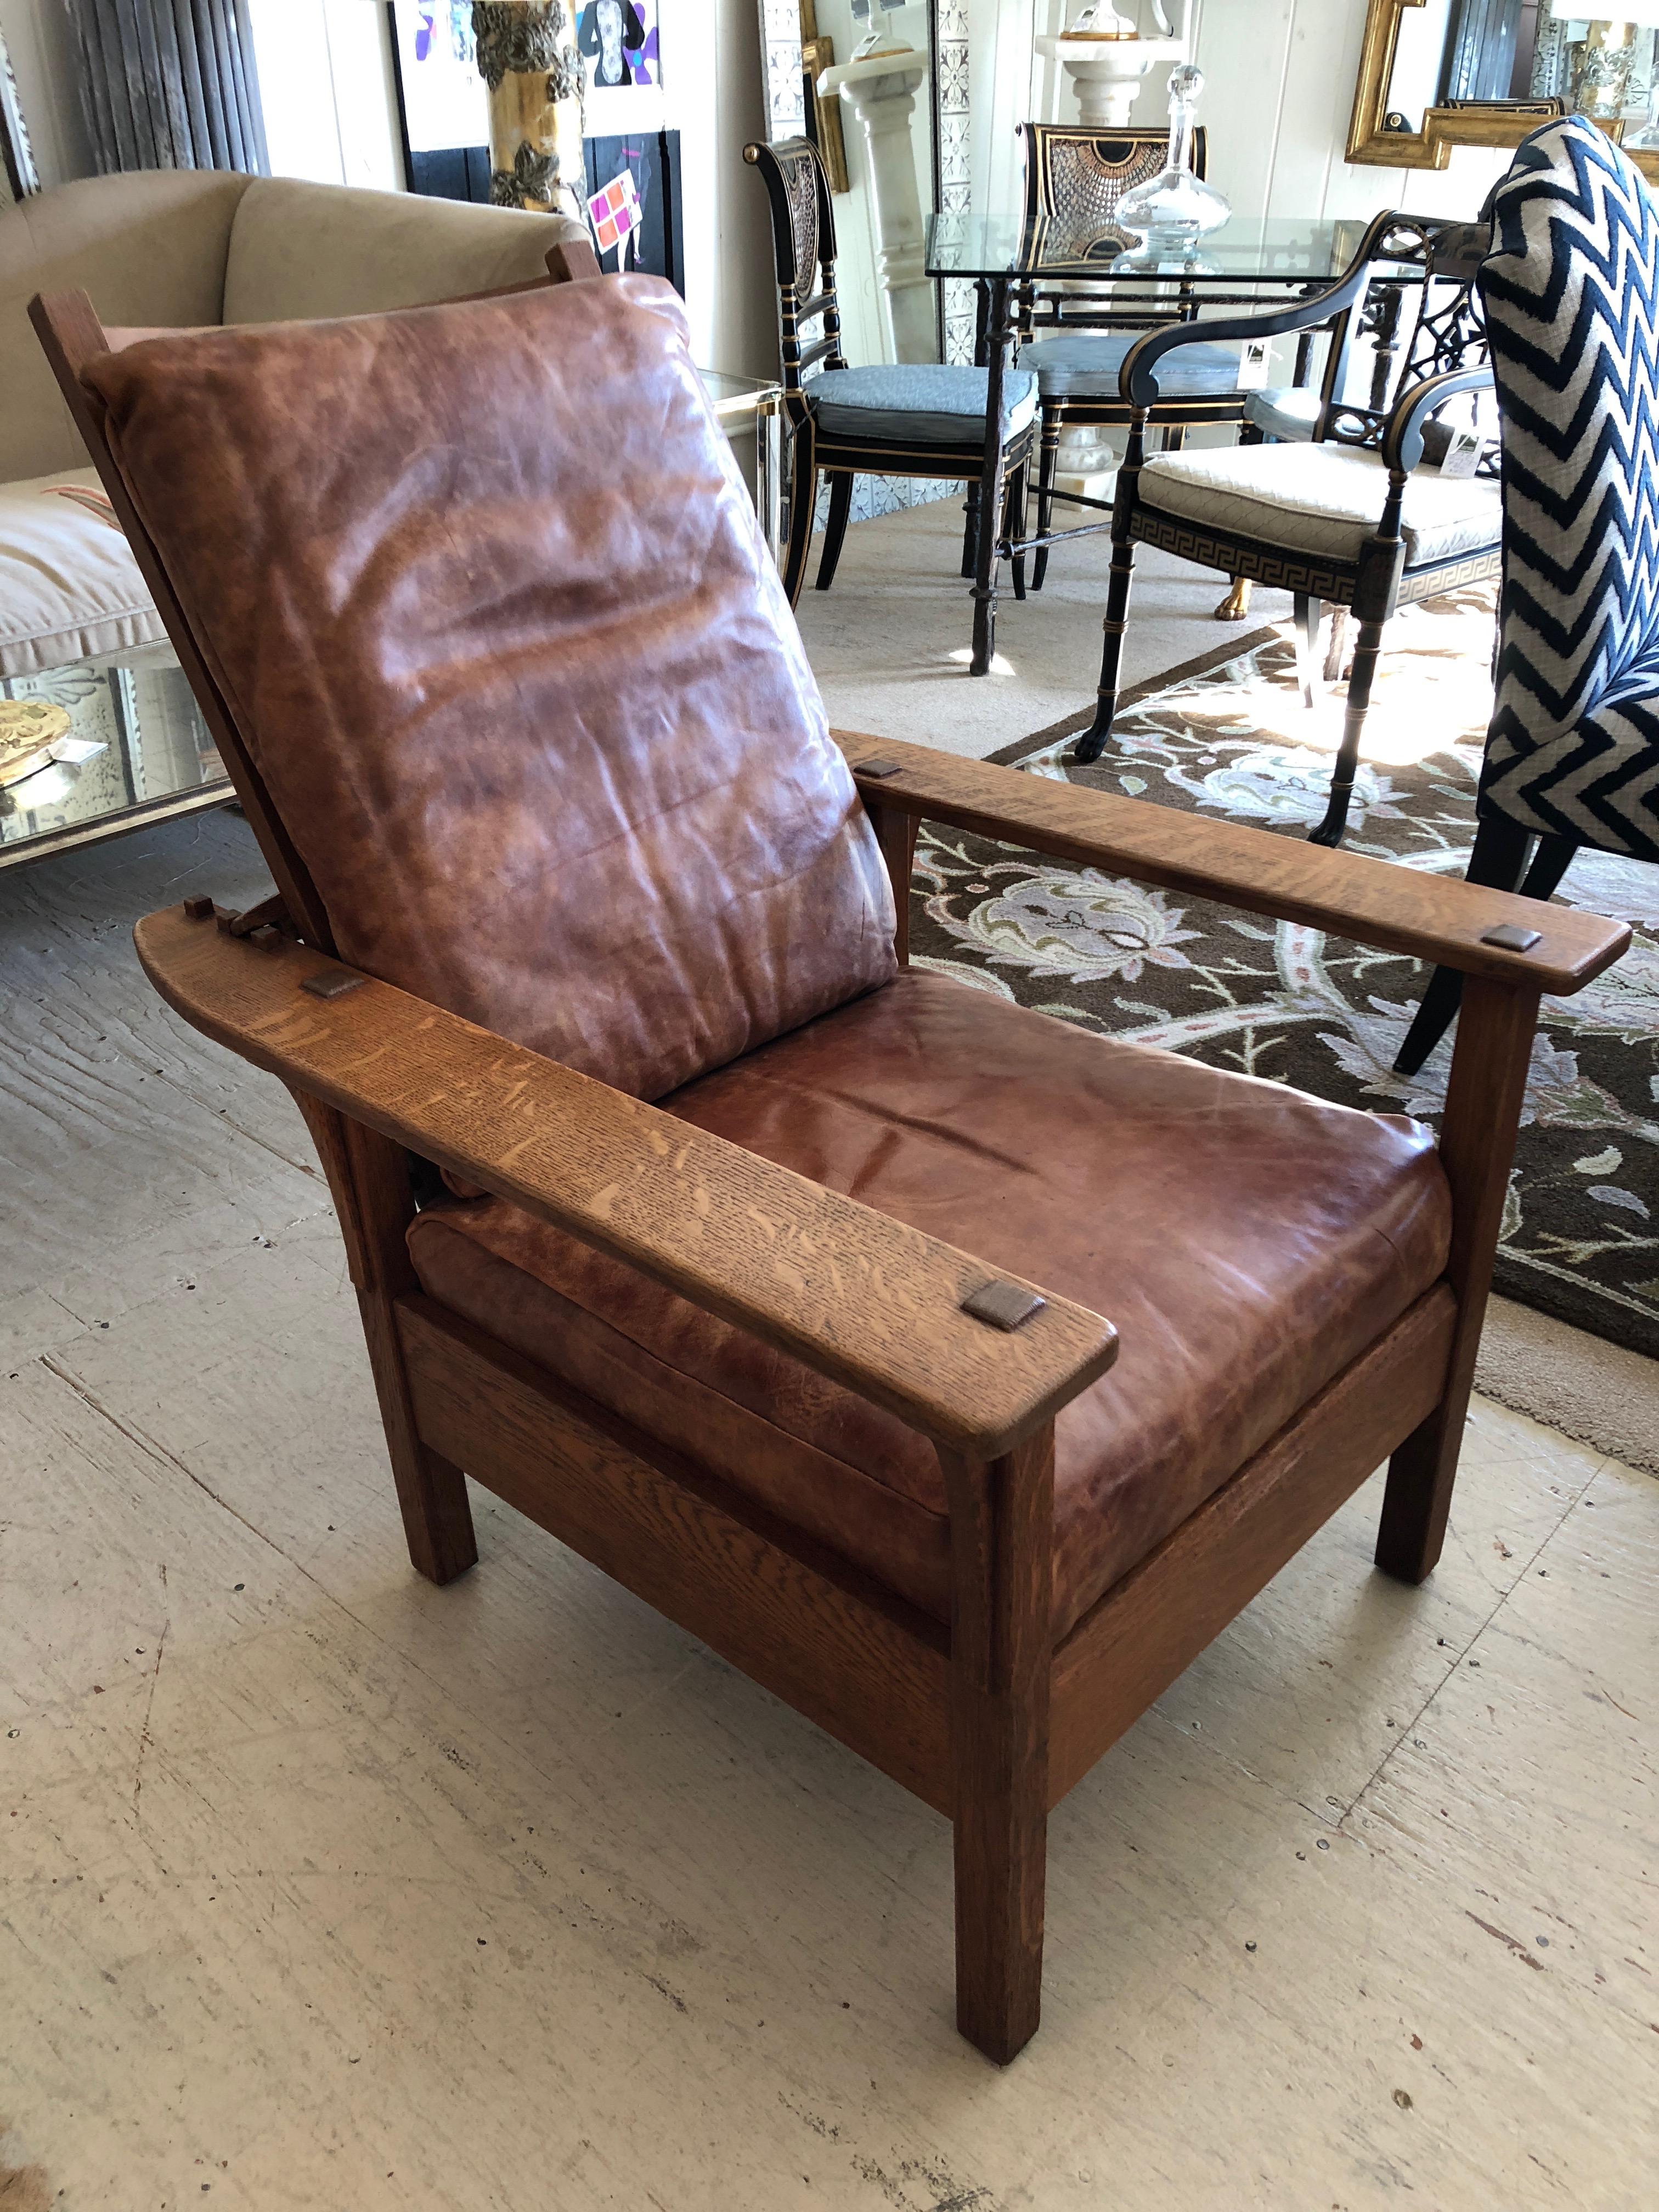 Handsome Arts & Crafts Morris lounge chair having an adjustable back with notched wood system and distressed leather seat and back cushion. 
Measures: Seat depth 21 arm height 23.75.